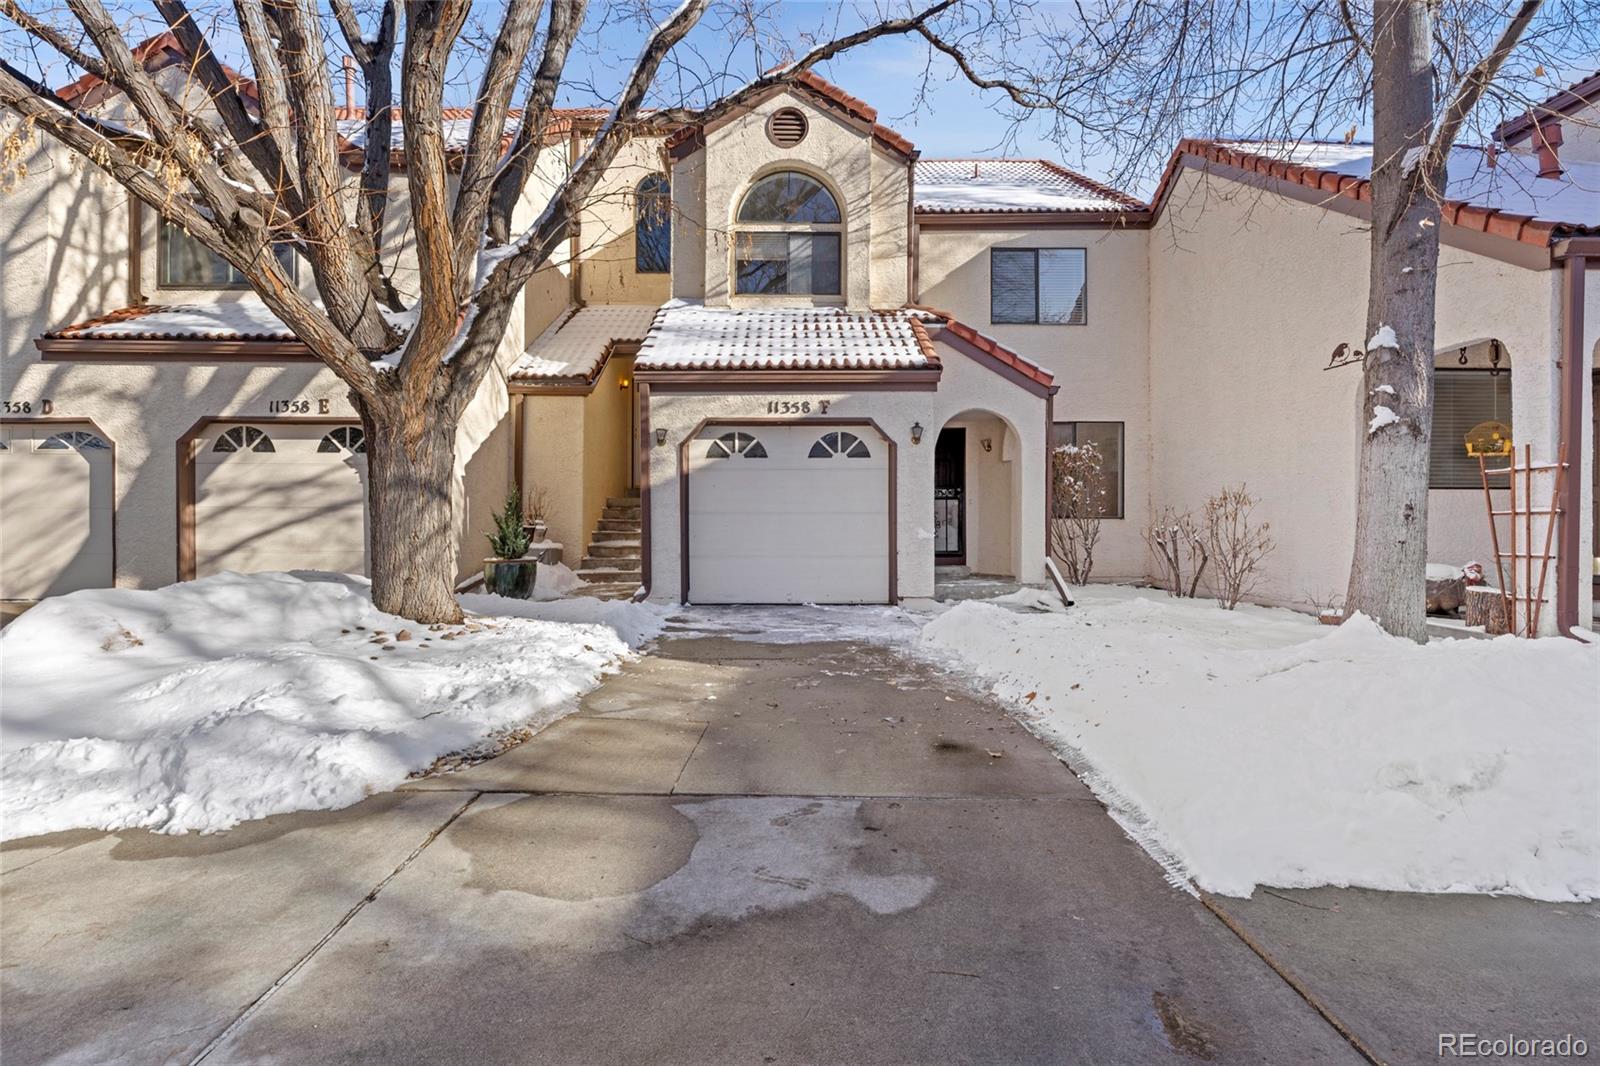 11358 w 85th place, Arvada sold home. Closed on 2024-04-04 for $472,500.